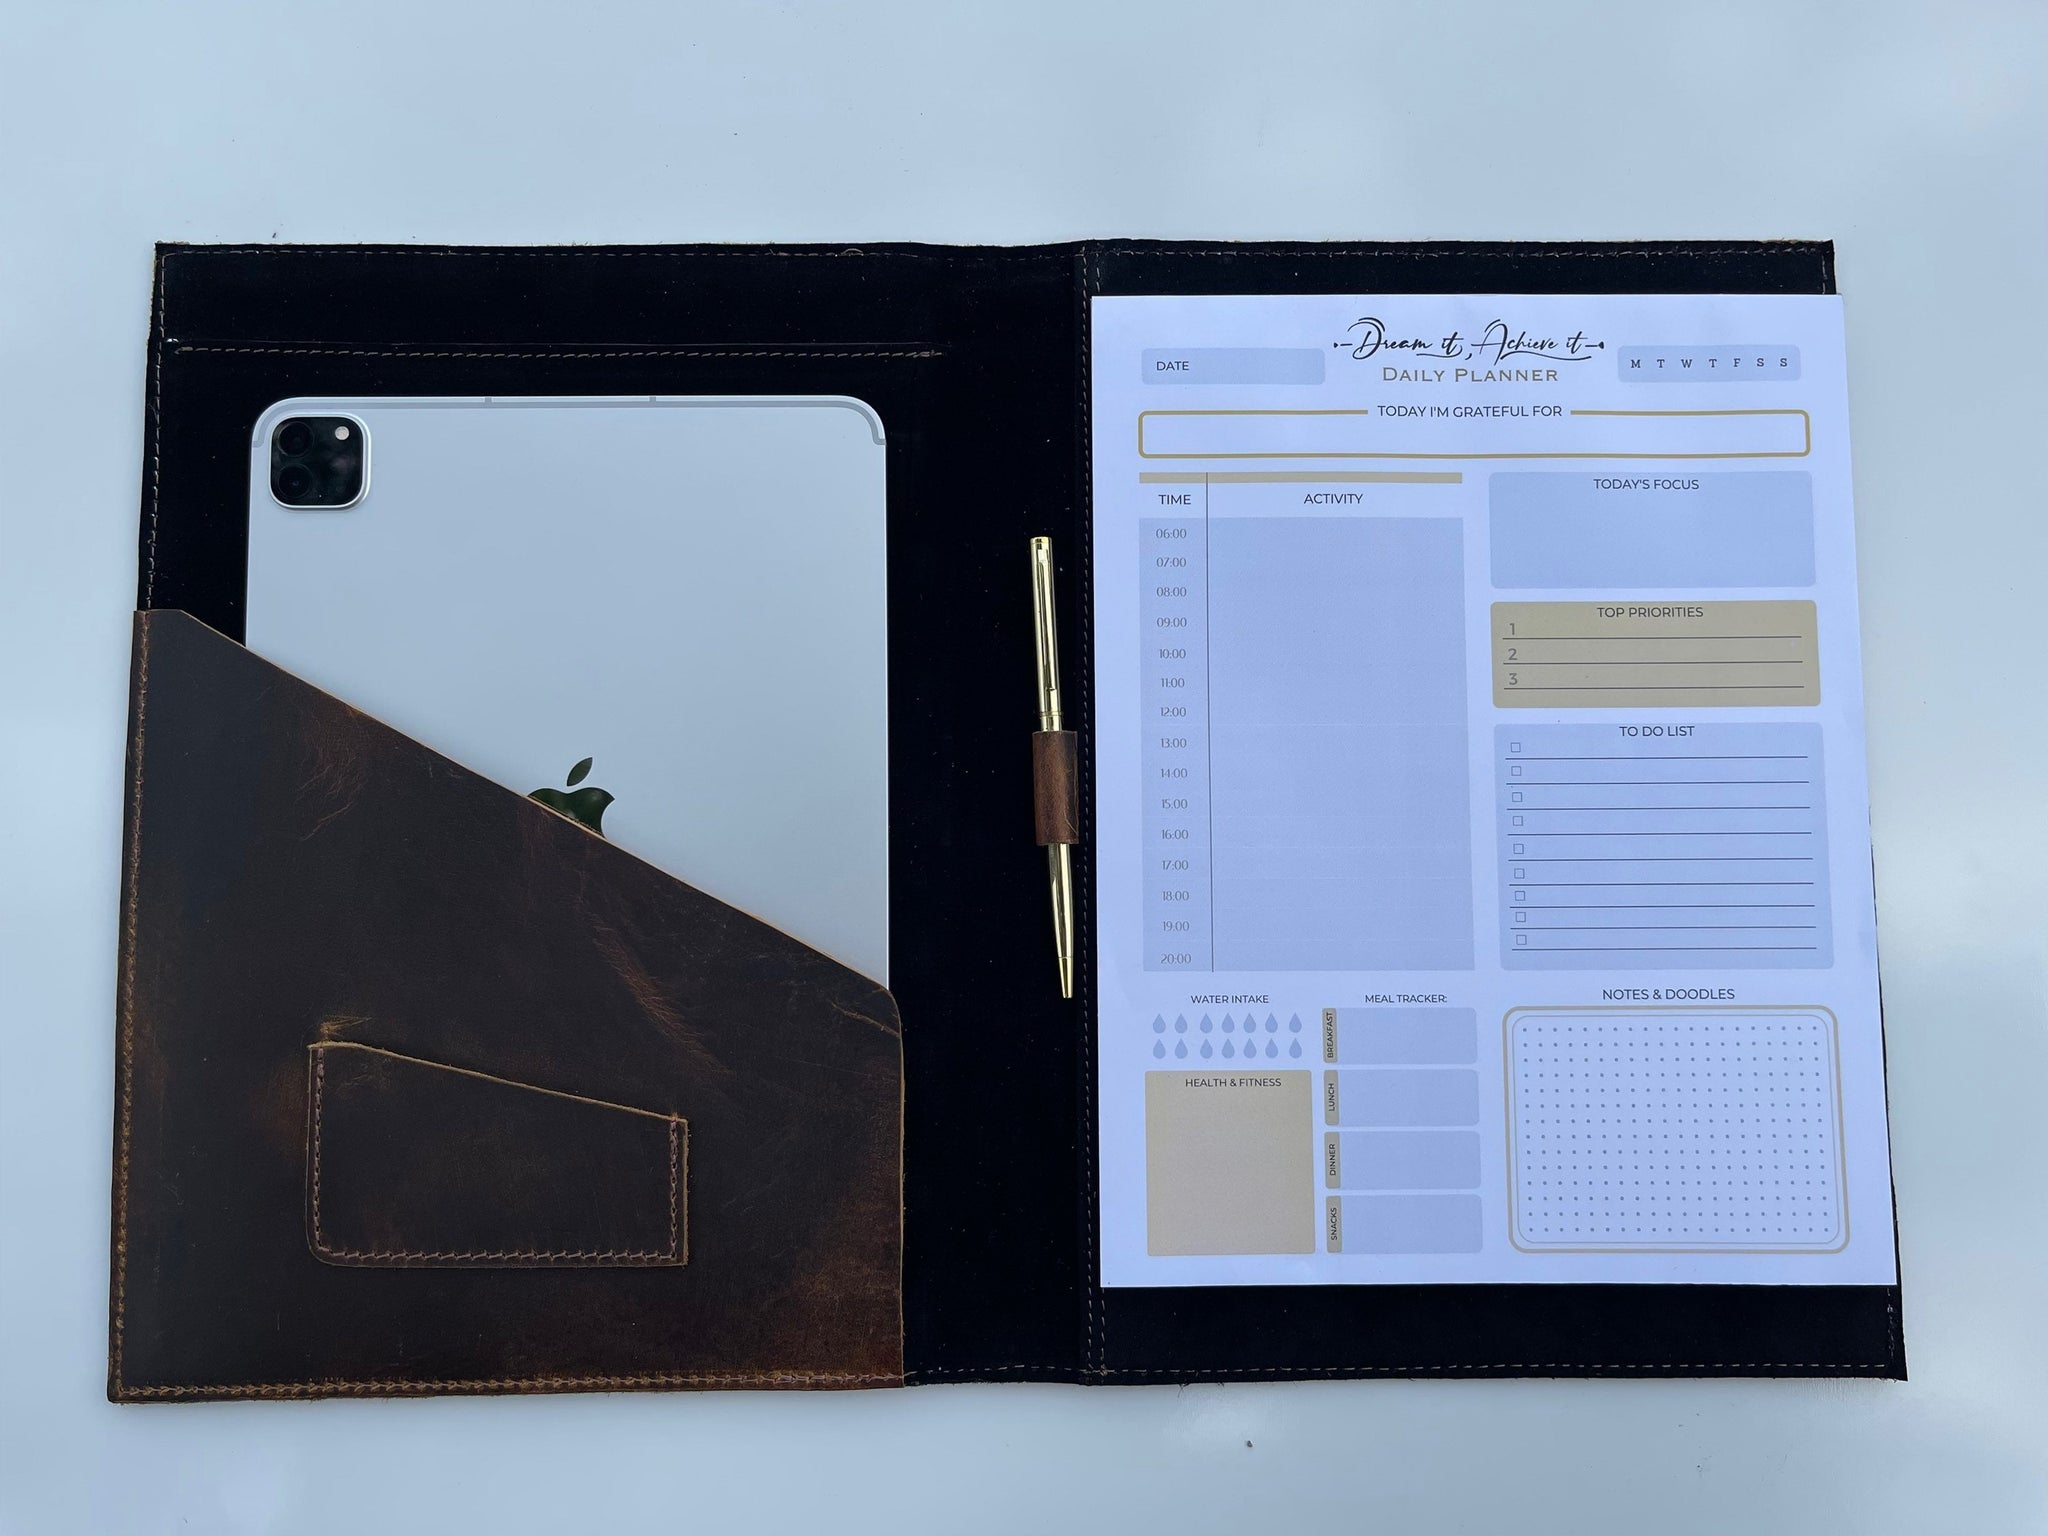 Ipad Pro 11inch, 10.5 inch Cover + Leather Portfolio + Pen, Weekly Planner, Daily Planner, Ipad Sleeve, Customized Padfolio